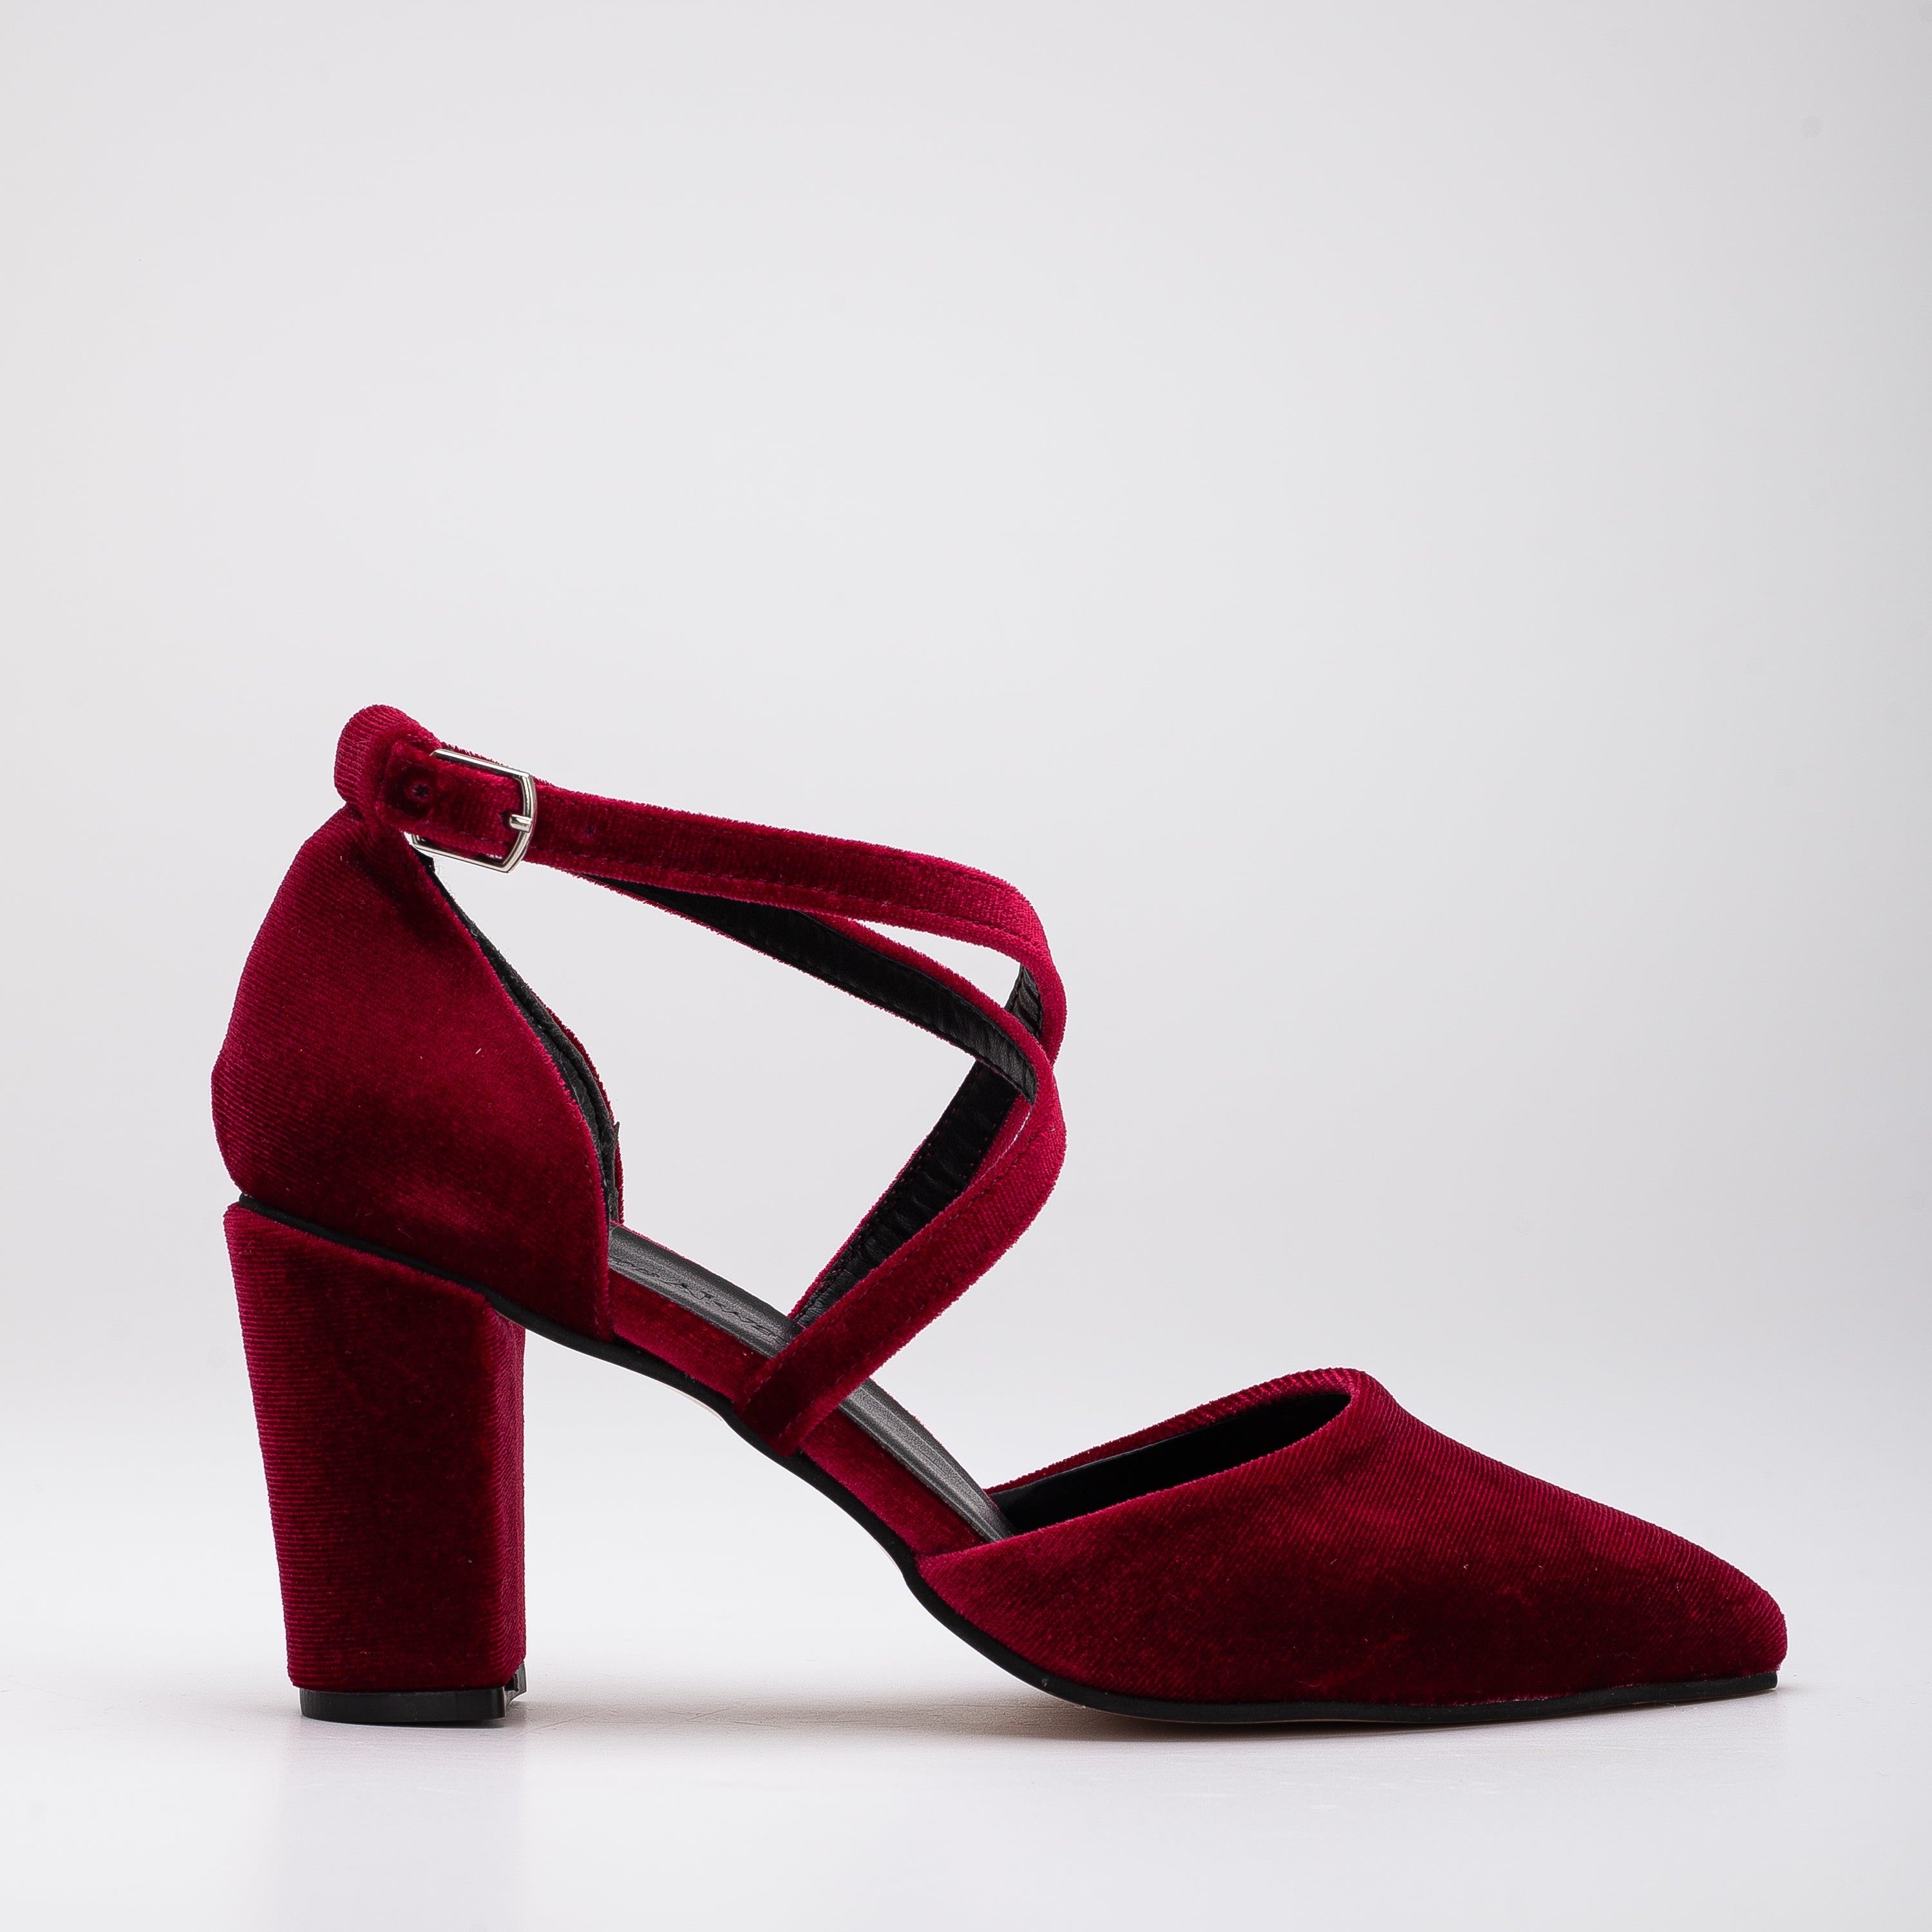 Burgundy High Heel Platform Sandals With a Bow knot With Leather Ankle –  ADONIS BOUTIQUE